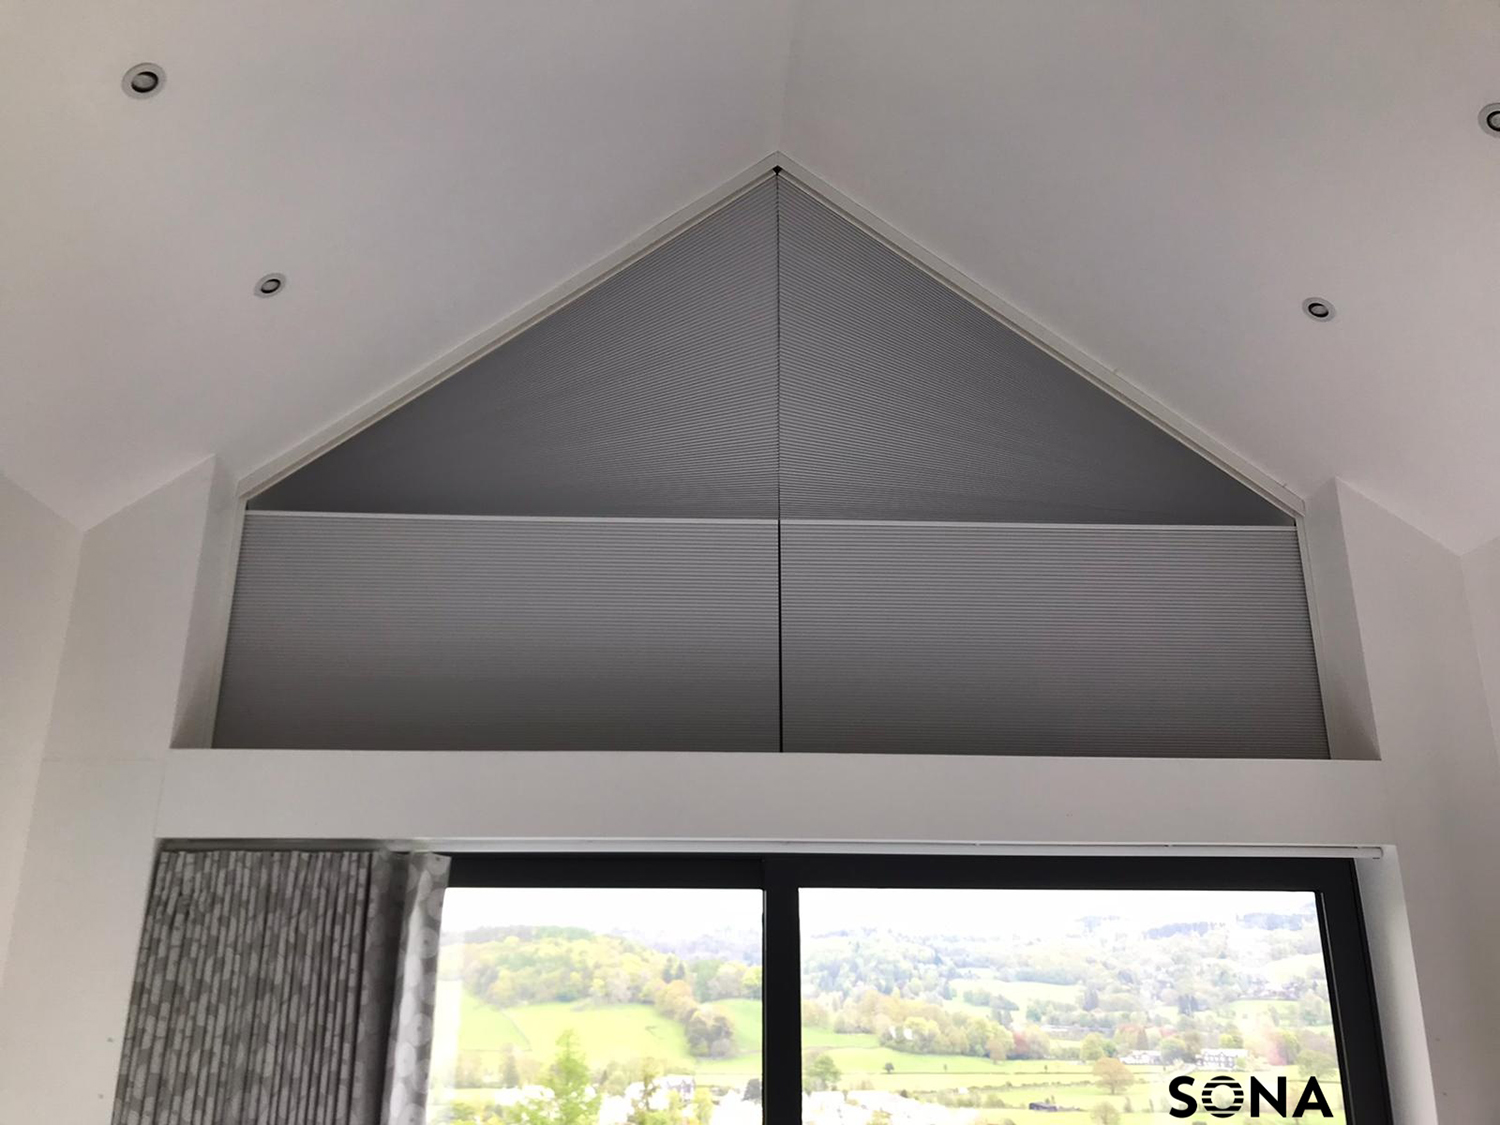 Wow your clients with SONA's Smart Blinds for Apex & Shaped Windows